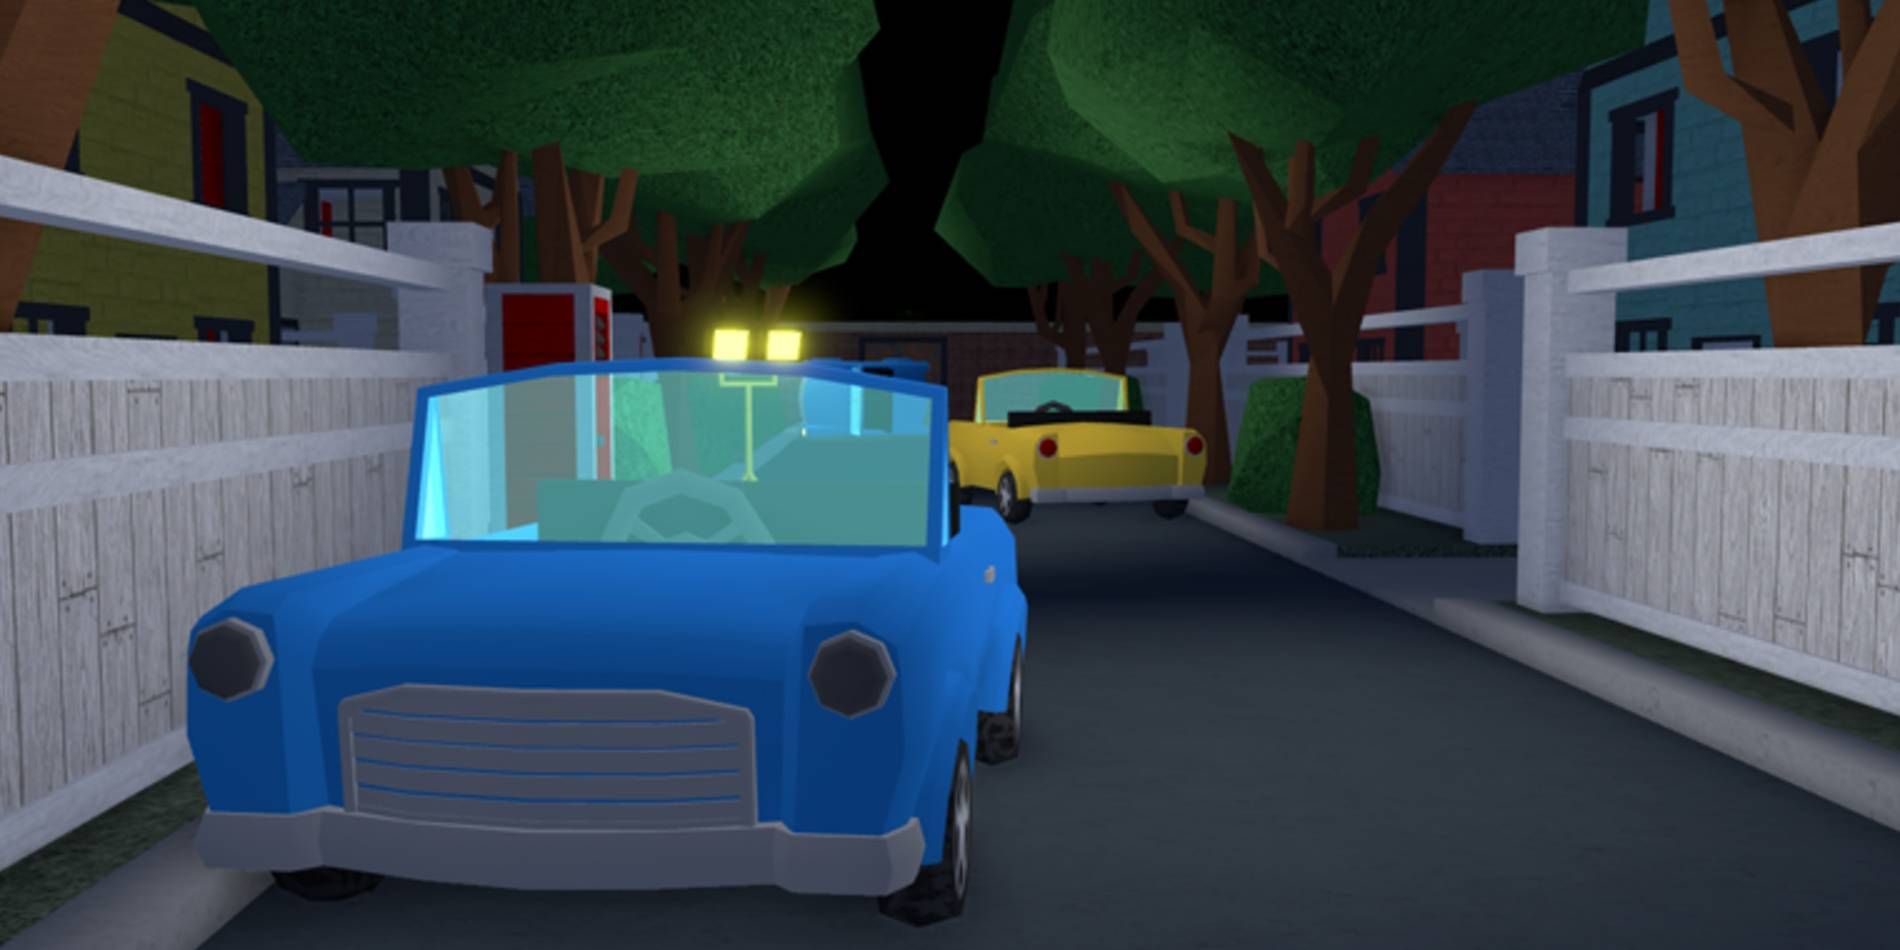 Roblox: Survive the Killer Map Image with Cars and Houses for Players to Hide In or Around